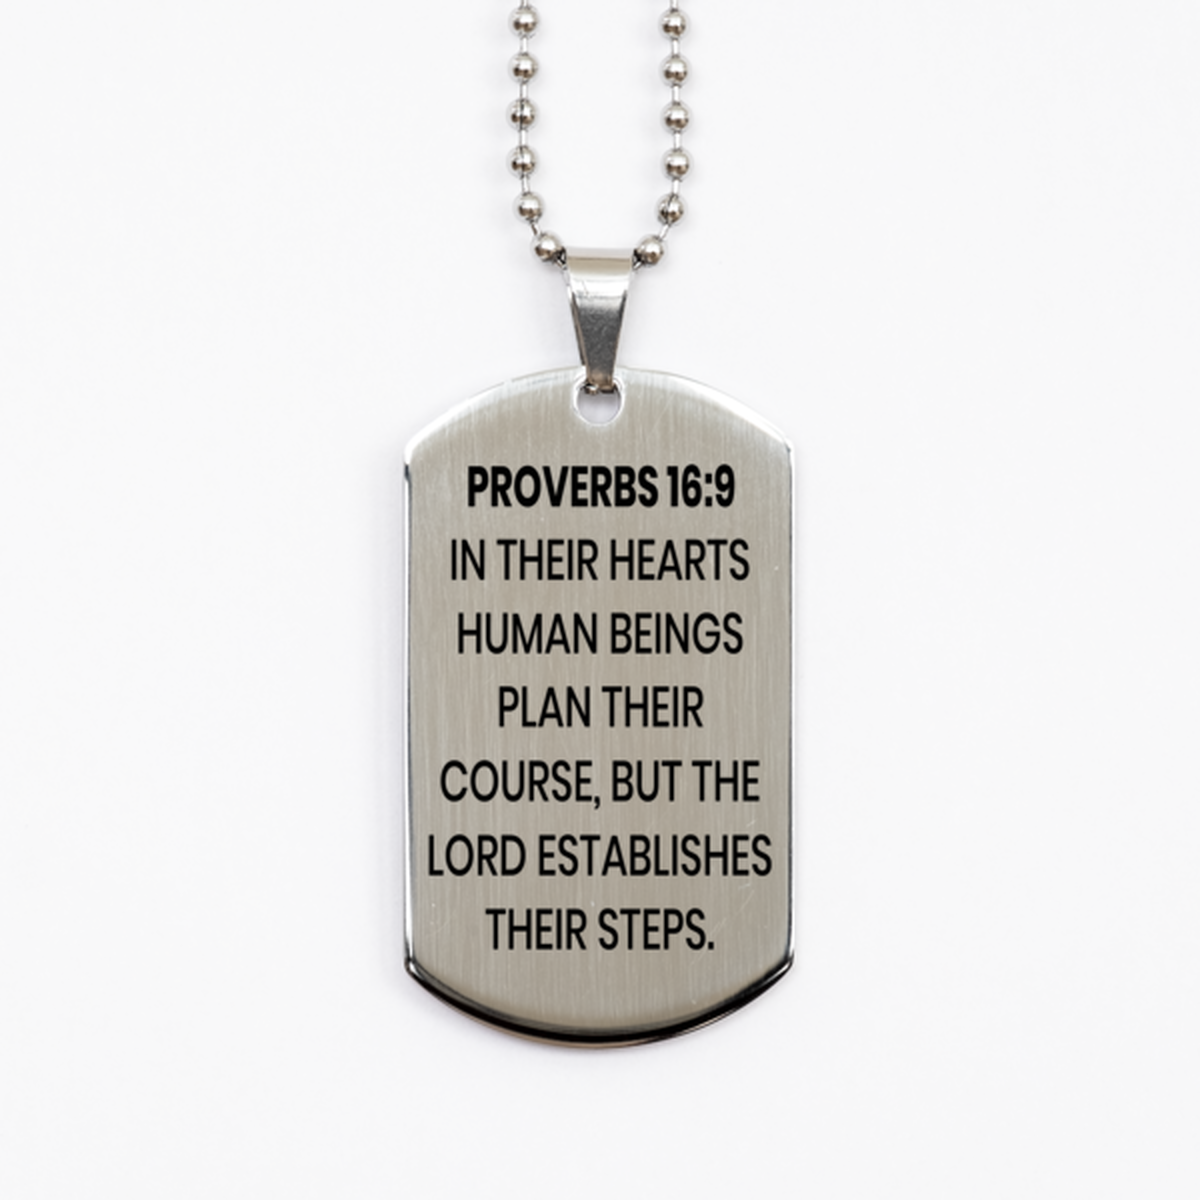 Proverbs 16:9 Necklace, Bible Verse Necklace, Christian Necklace, Christian Birthday Gift, Stainless Steel Dog Tag Necklace, Gift for Christian.